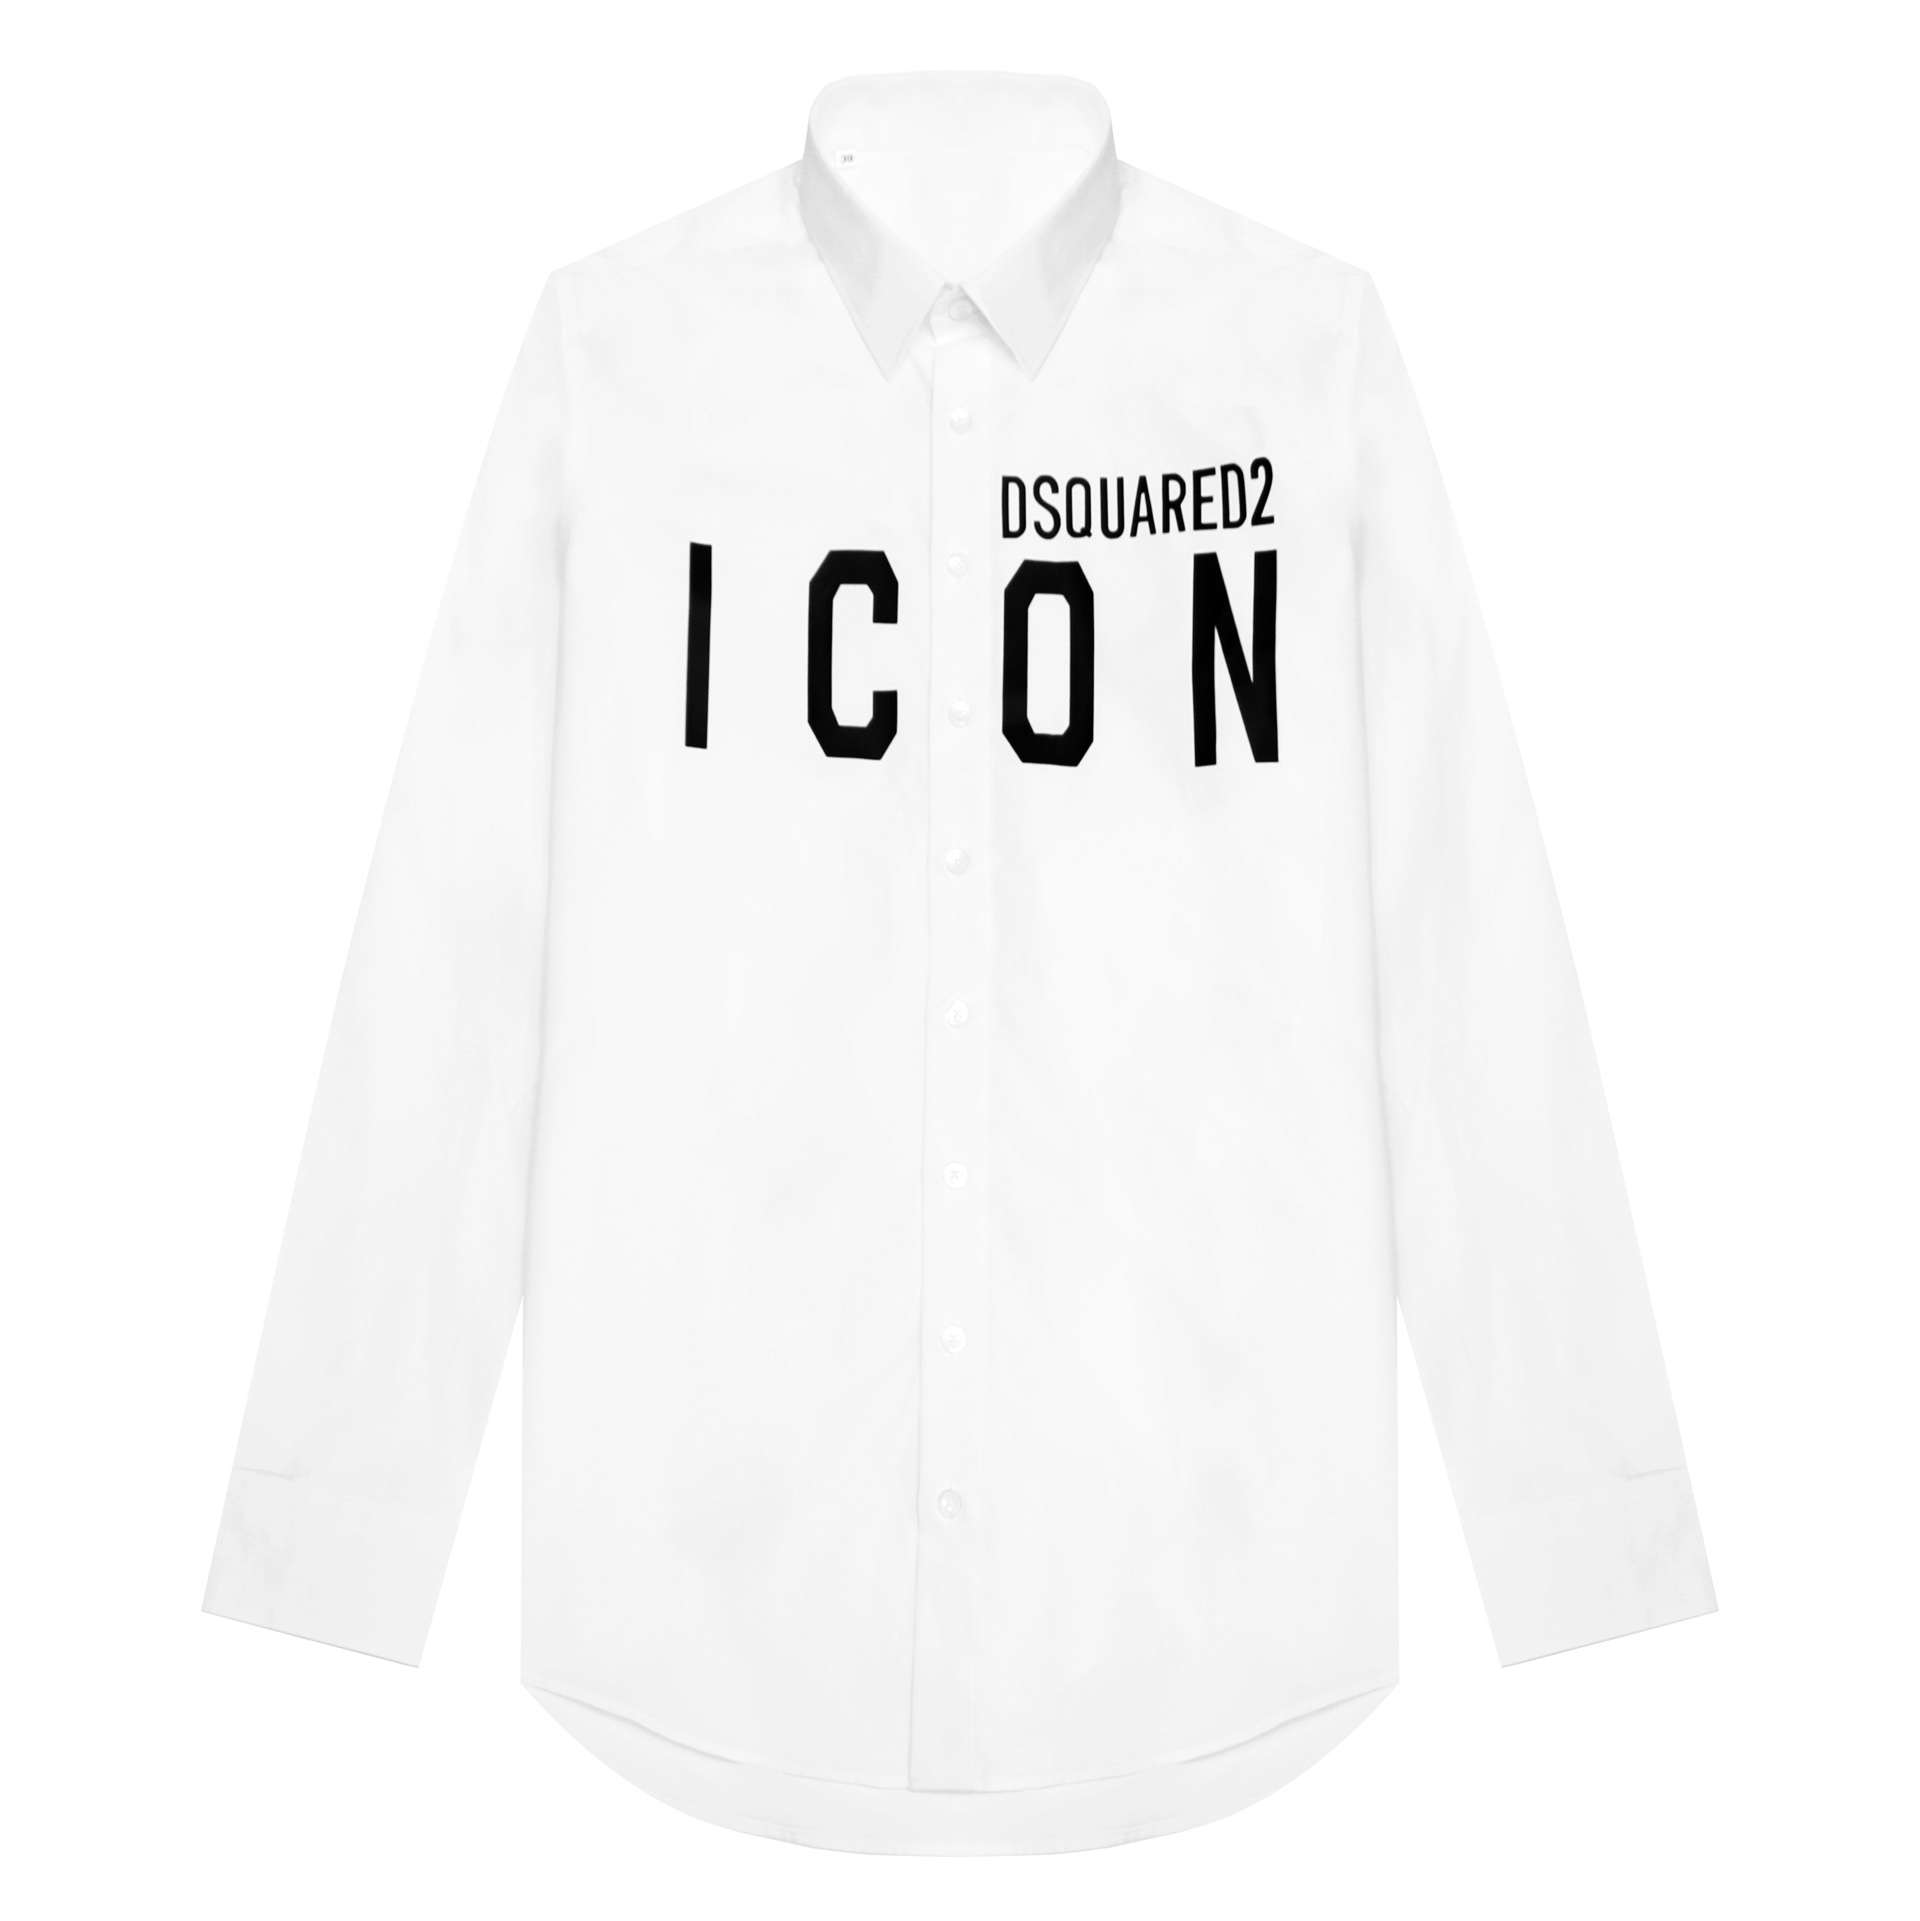 Dsquared2 Long Sleeve Shirts For Men # 269702, cheap DsQuared 2 Shirts, only $49!